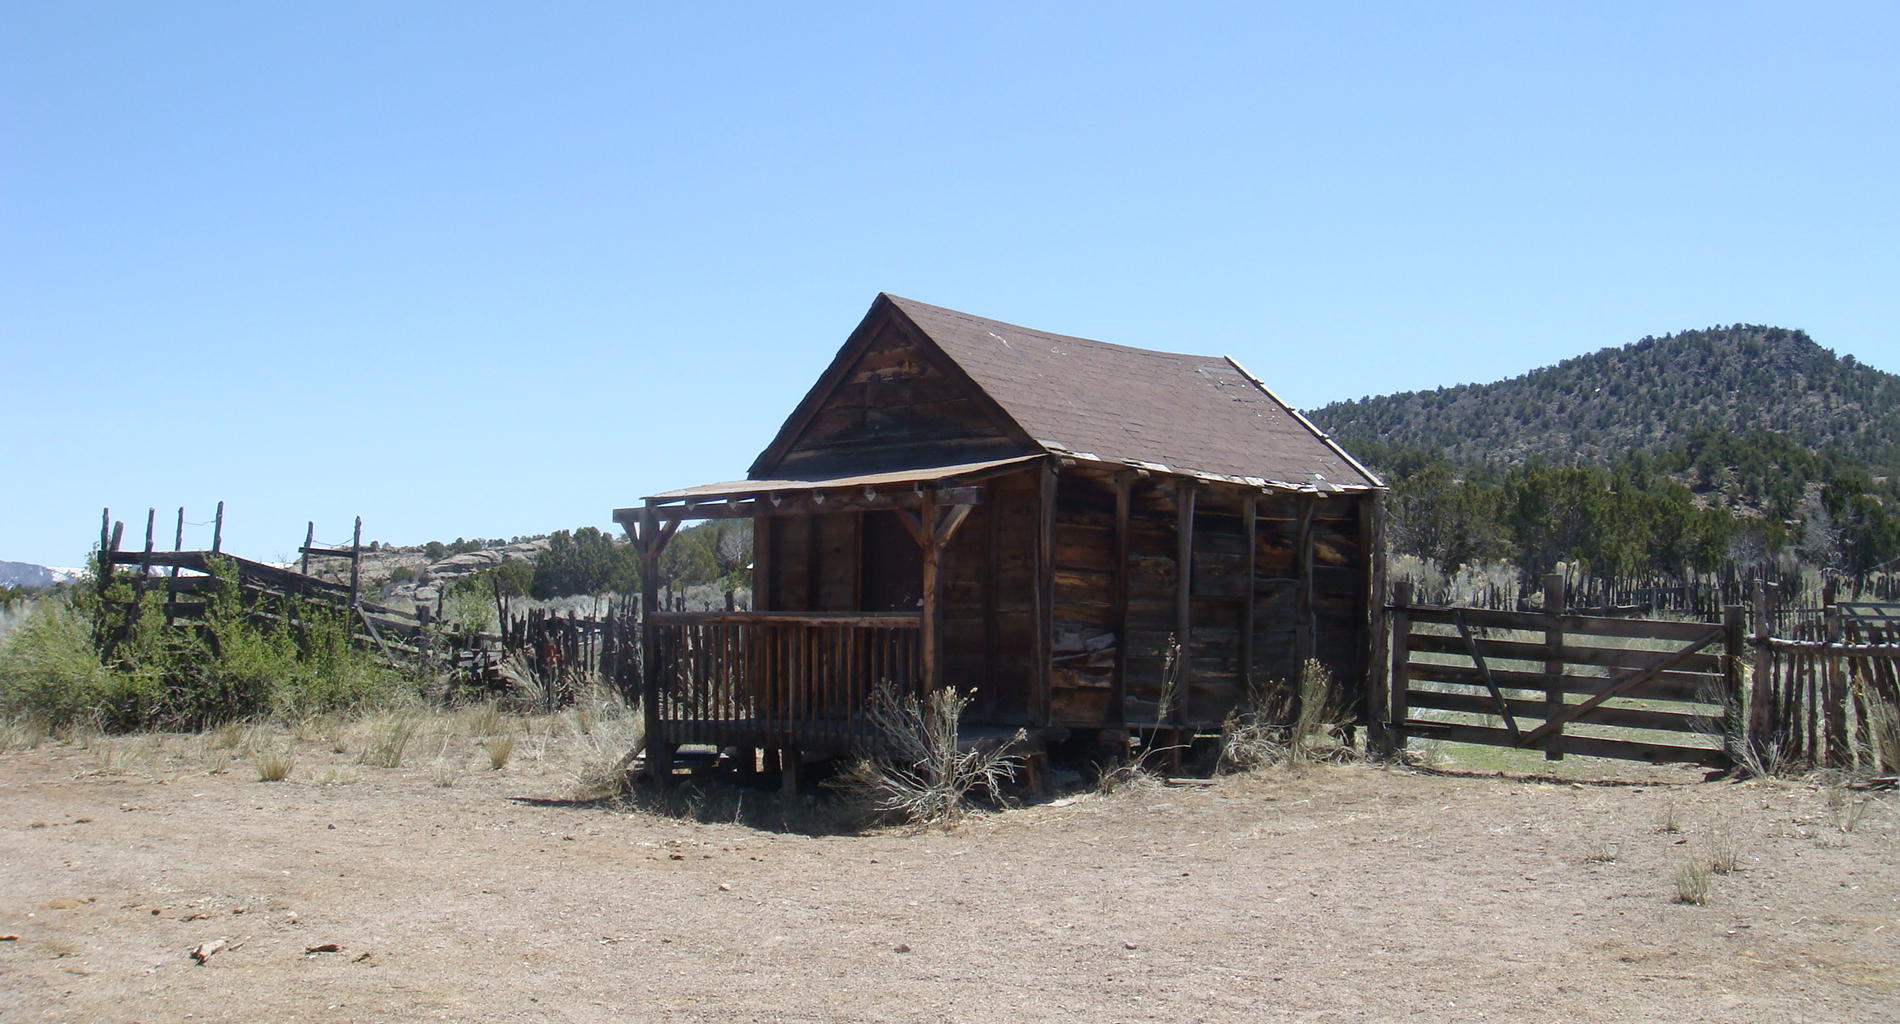 Cabin and Corrals at the Terry Ranch